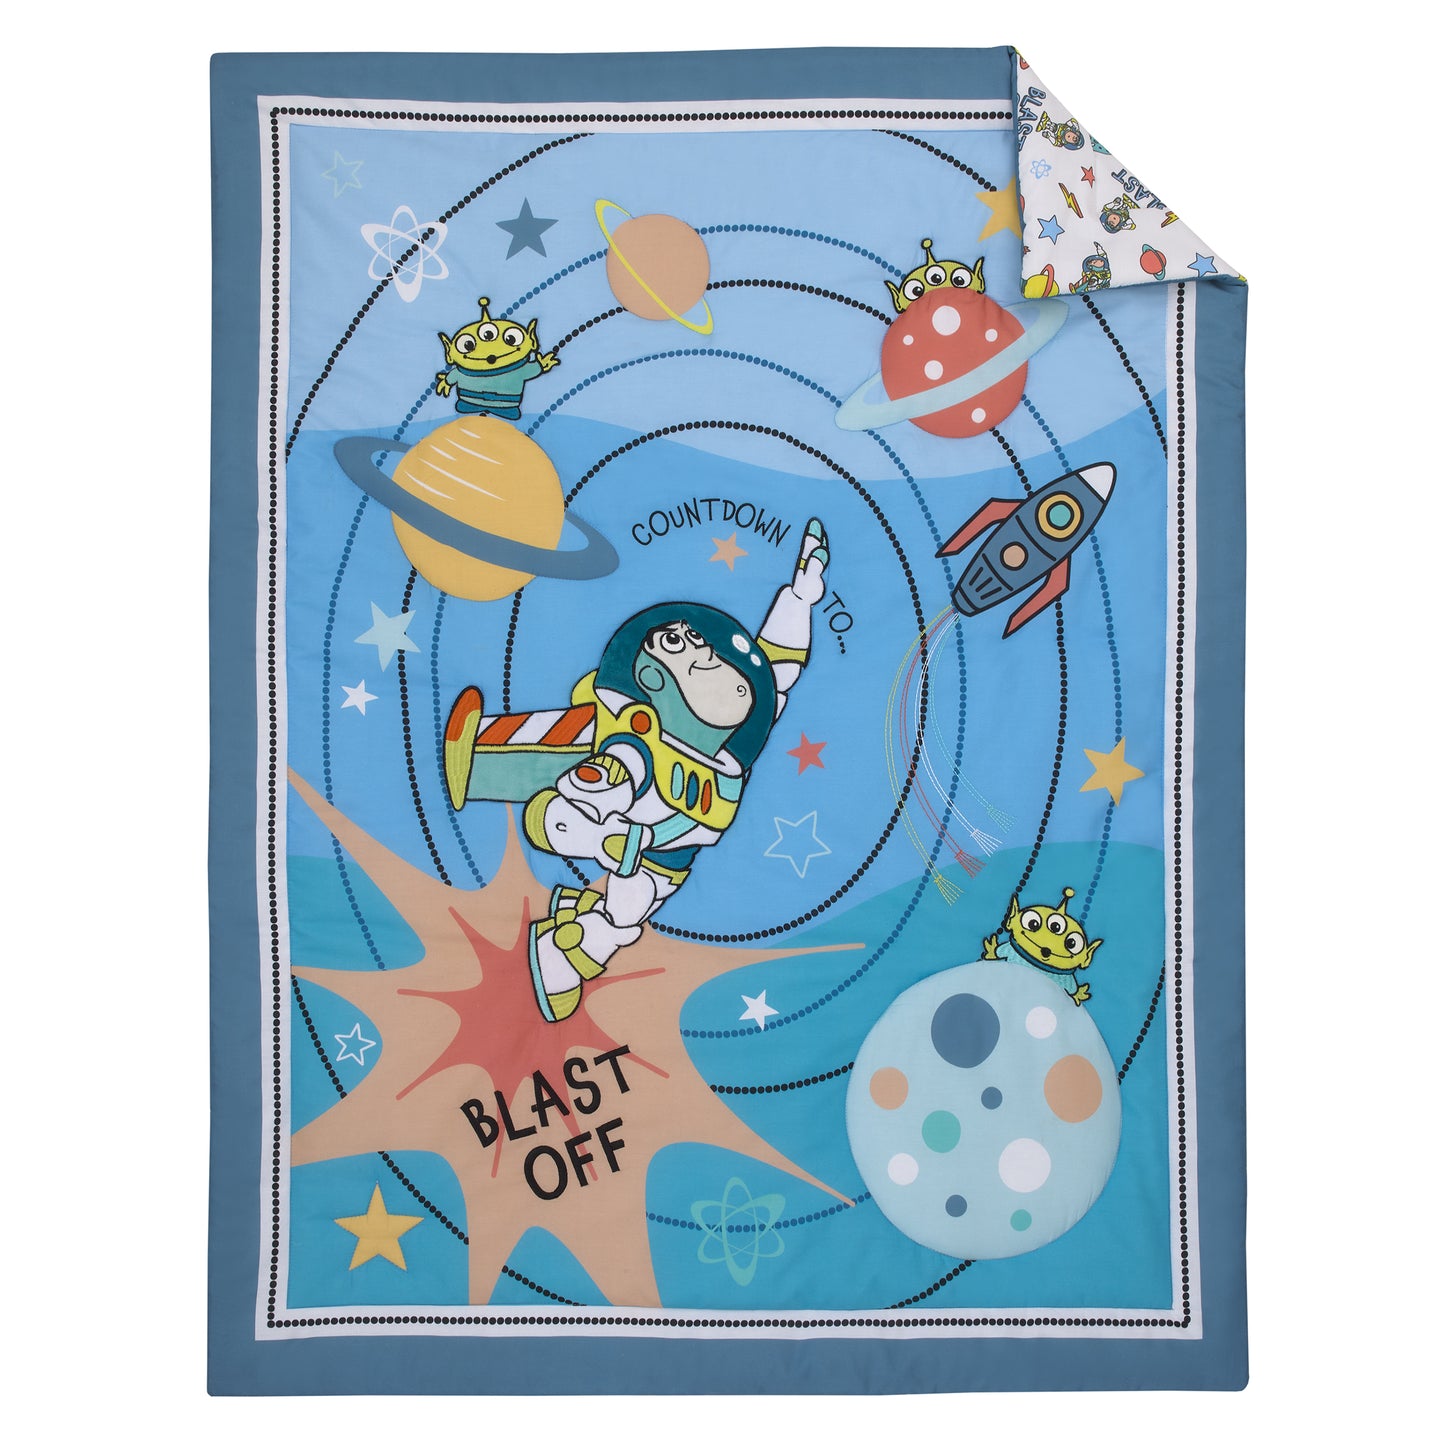 Disney Toy Story Buzz Lightyear Blue, Orange, and Yellow Countdown to Blast-Off 3 Piece Nursery Crib Bedding Set - Comforter, 100% Cotton Fitted Crib Sheet and Crib Skirt